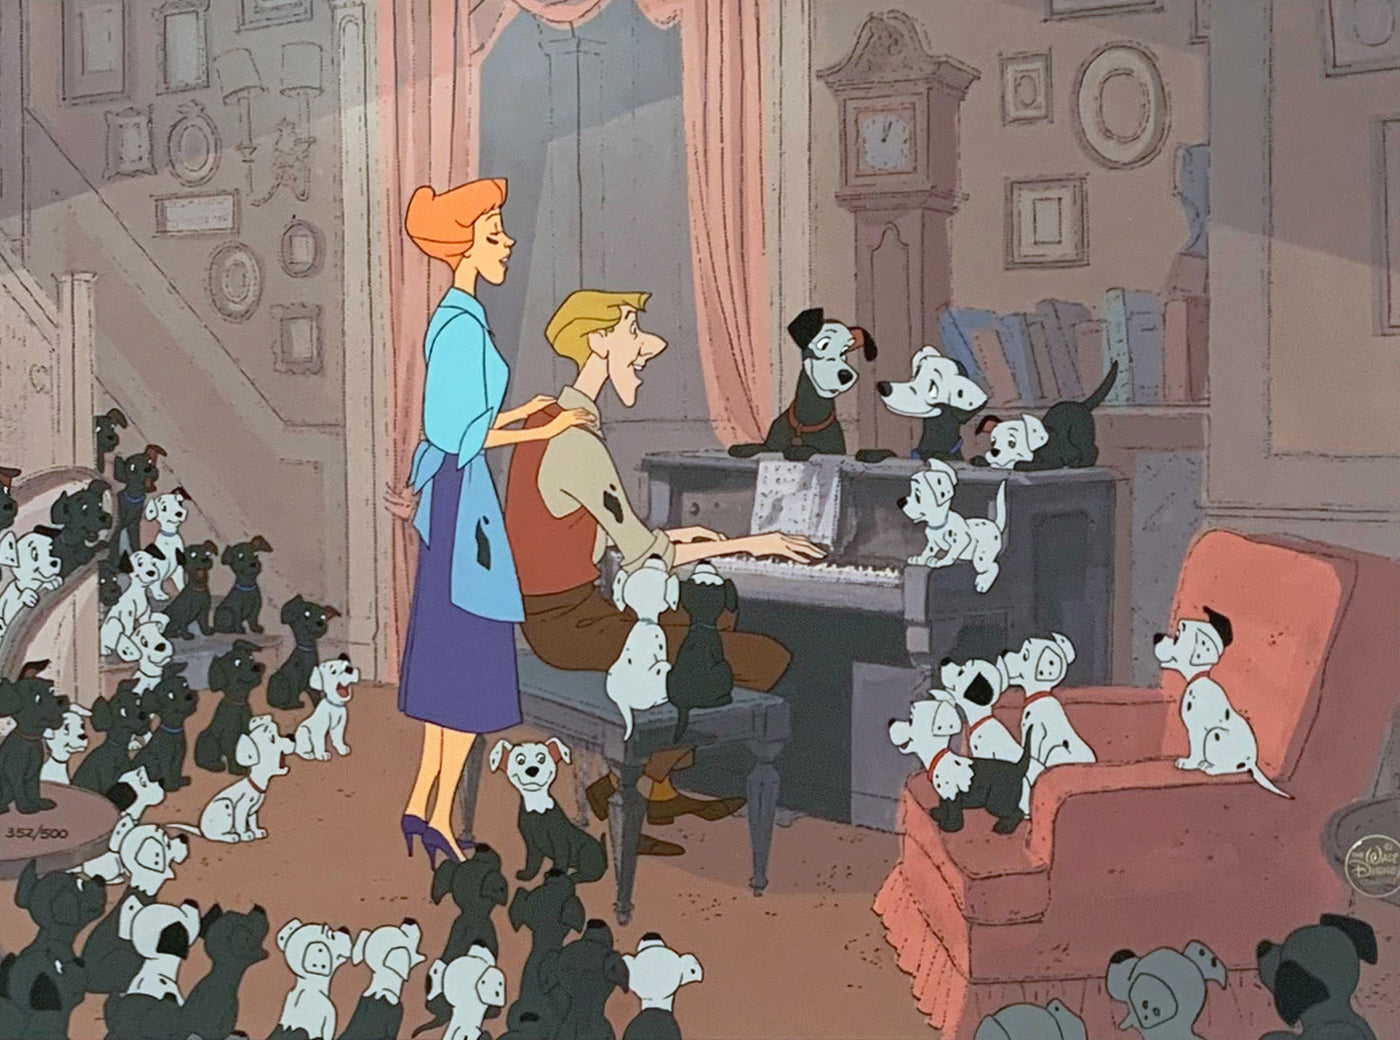 Original Walt Disney Limited Edition Cel "At the Piano" from One Hundred and One Dalmatians